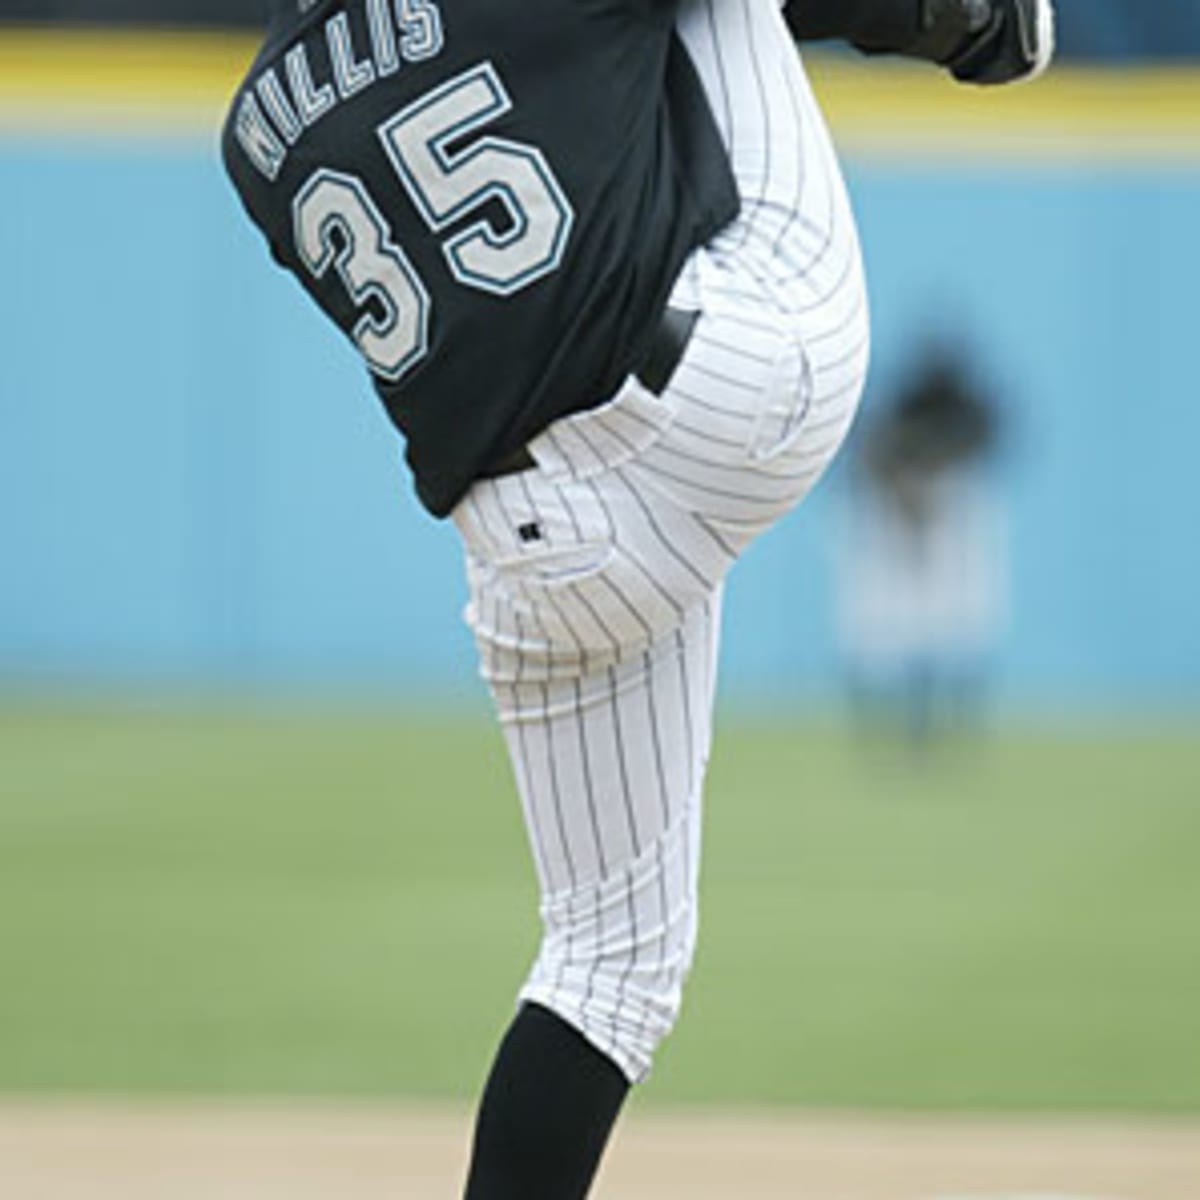 Florida Marlins starting pitcher Dontrelle Willis pitches during